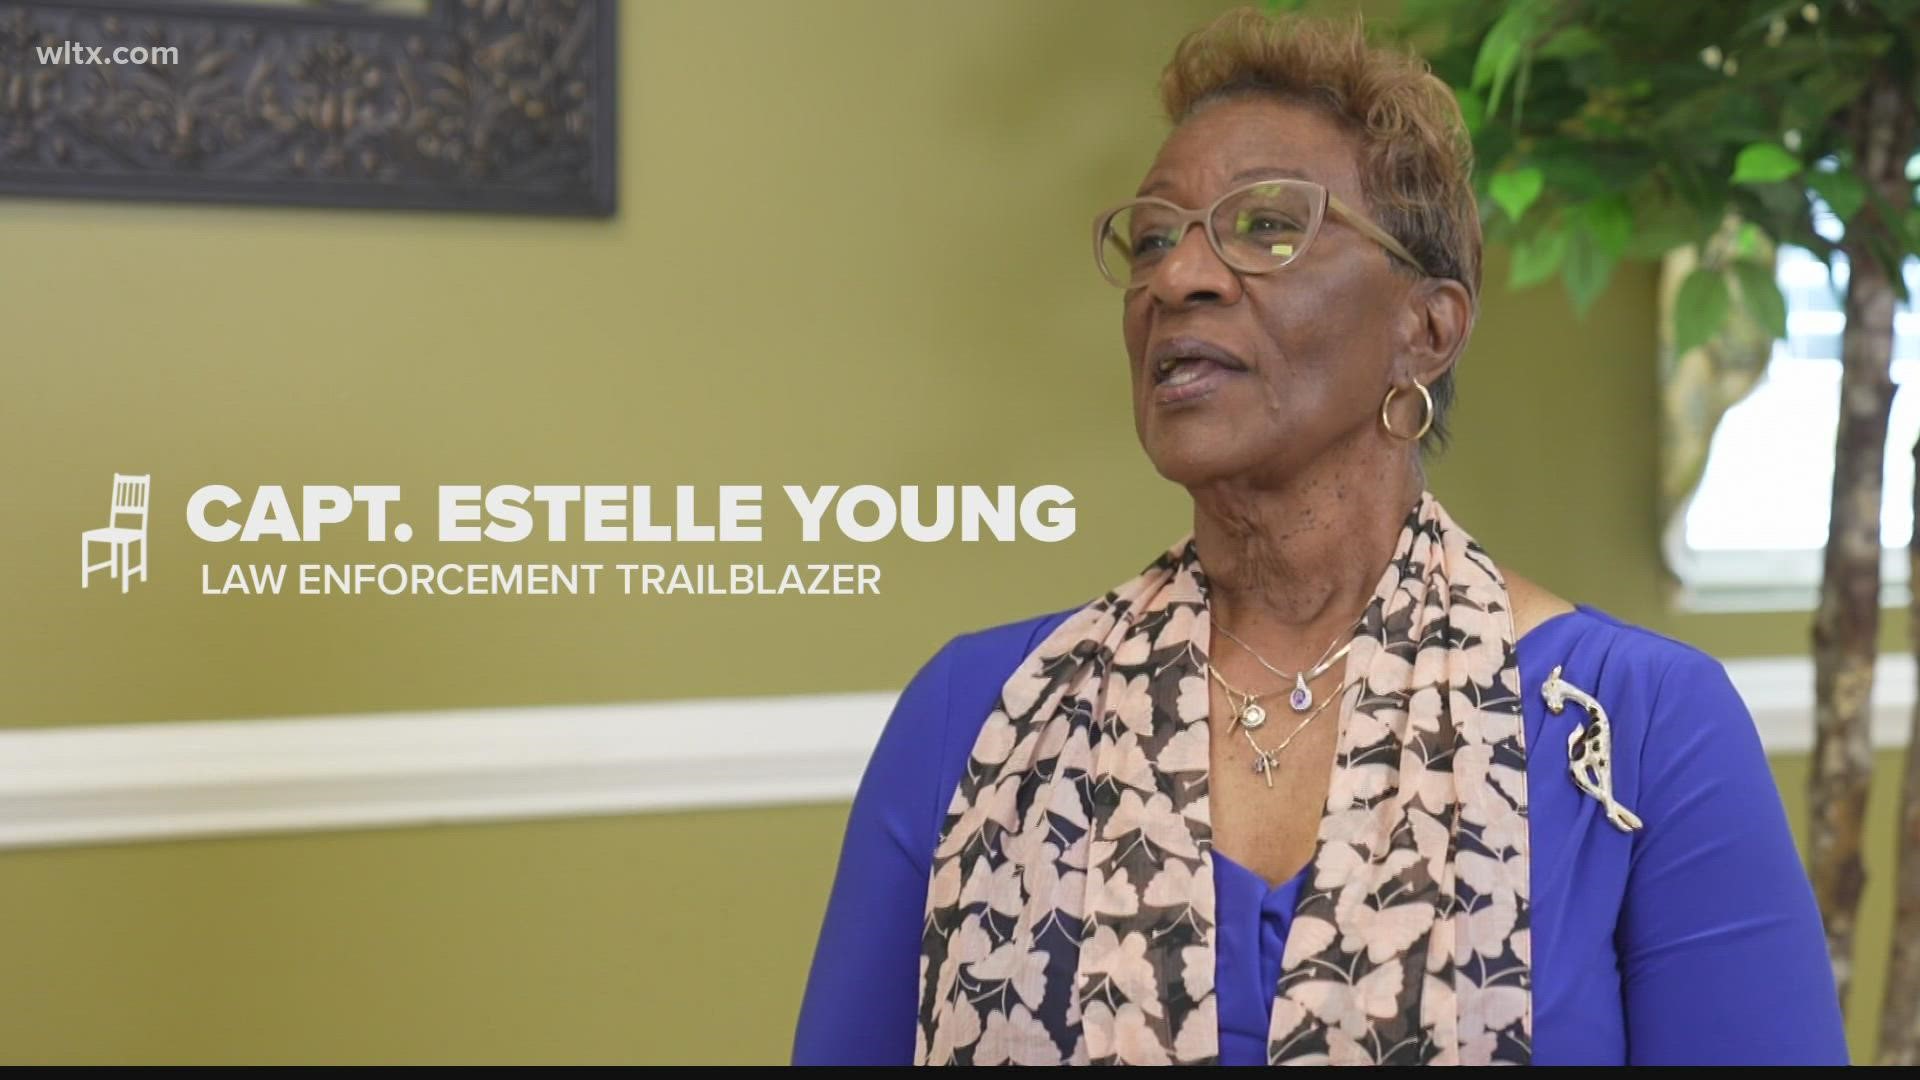 Estelle Young's work as a police officer, captain, and community advocate has cleared the way for many to follow.